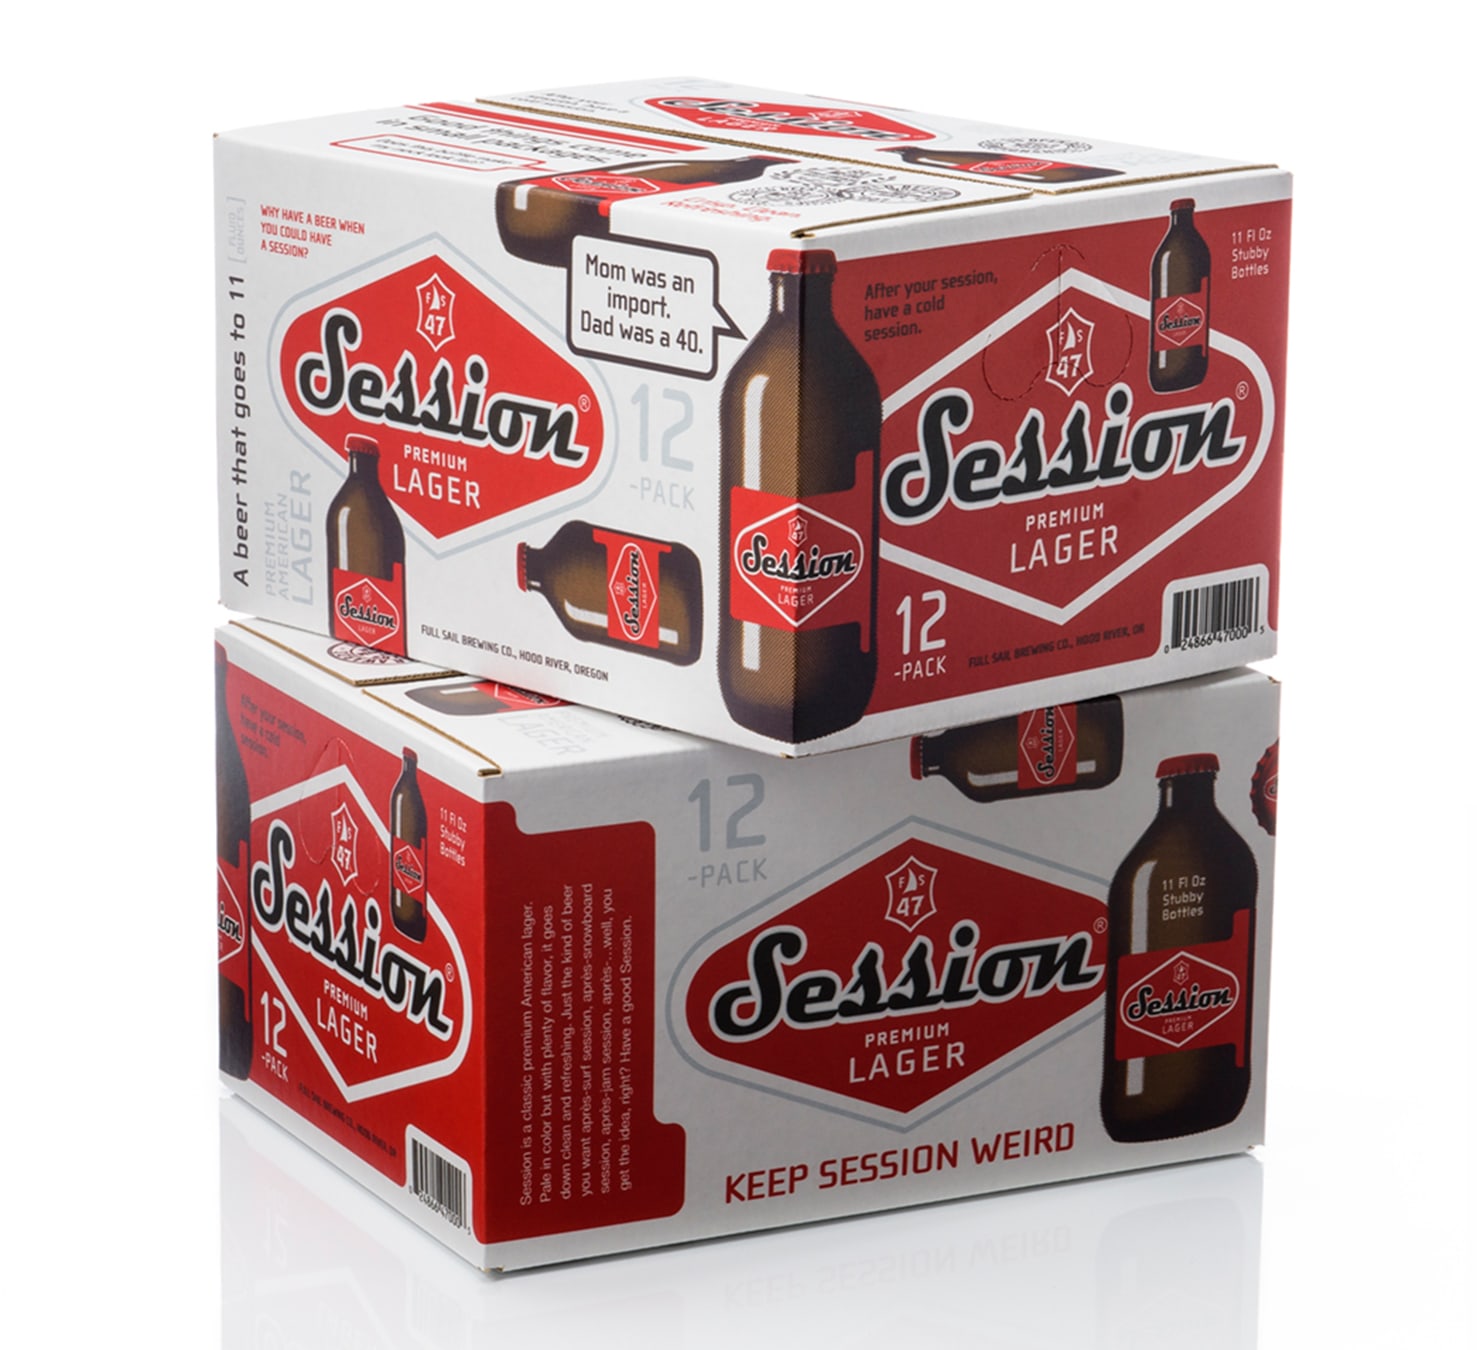 Session lager package design